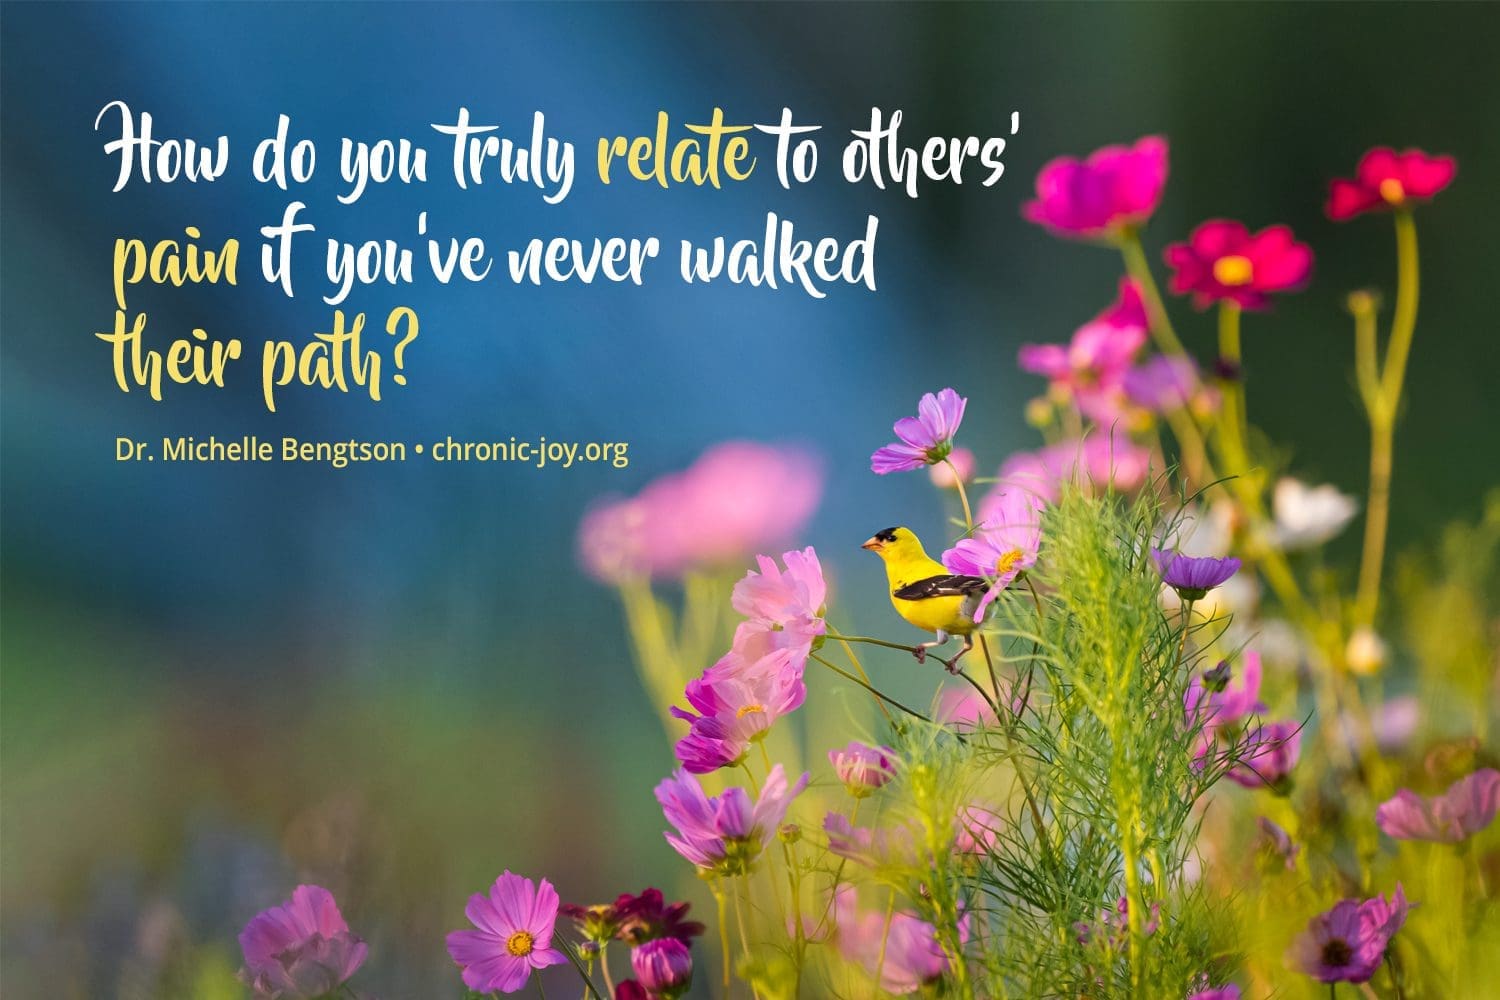 "How do you truly relate to others’ pain if you‘ve never walked their path?" Dr. Michelle Bengtson